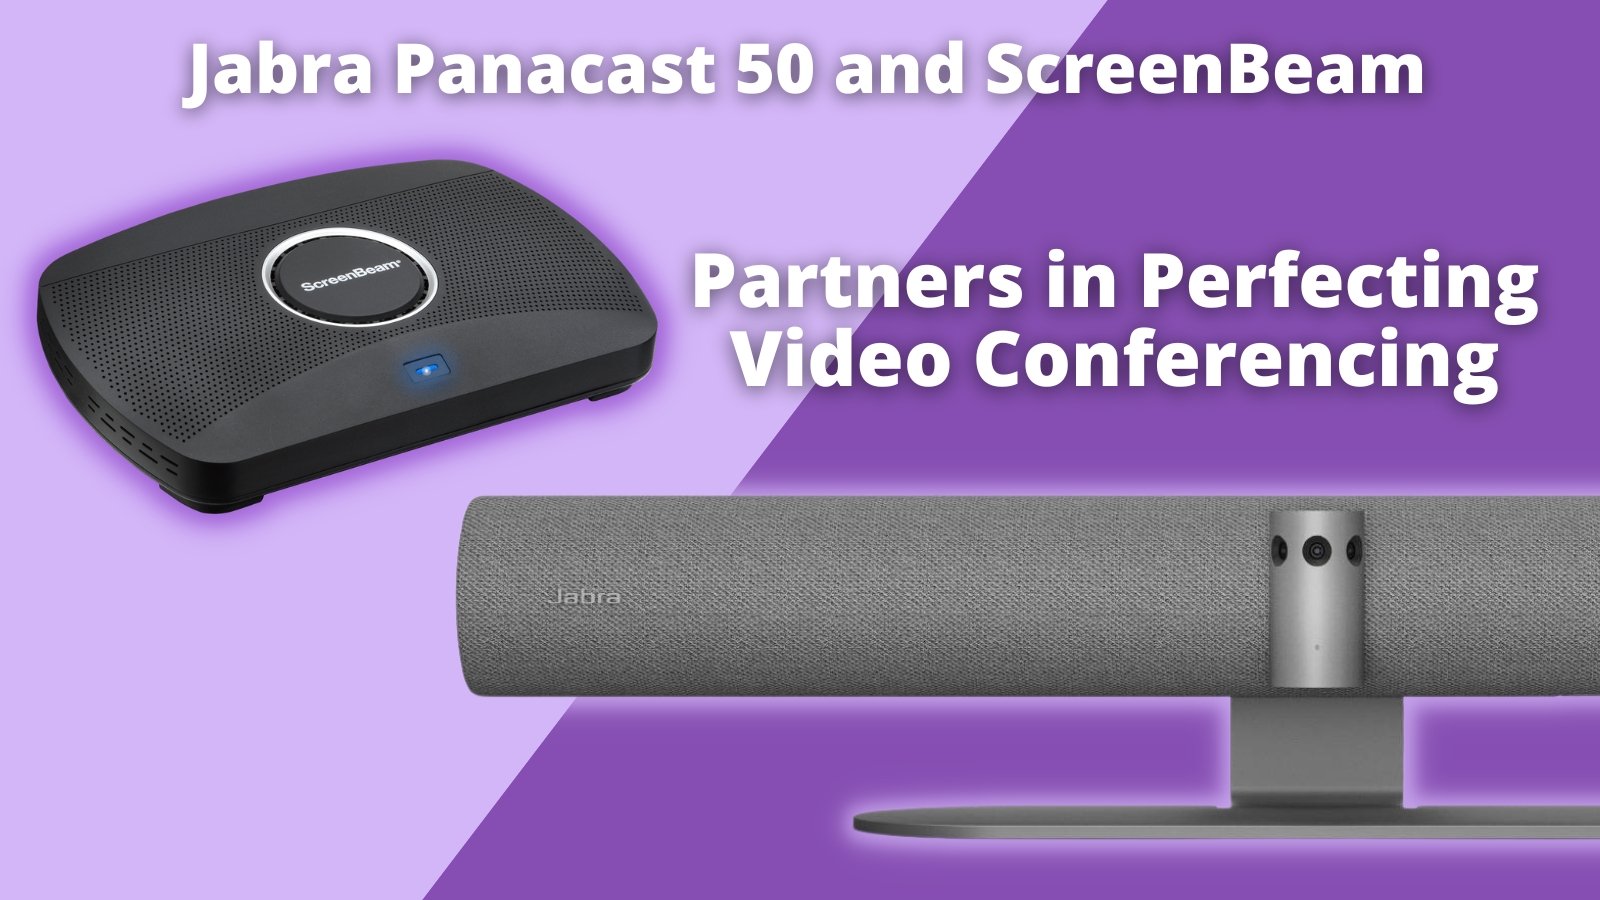 How Screenbeam 1100 Plus and Jabra Panacast 50 Can Improve Your Video Conferencing Experience - Headset Advisor